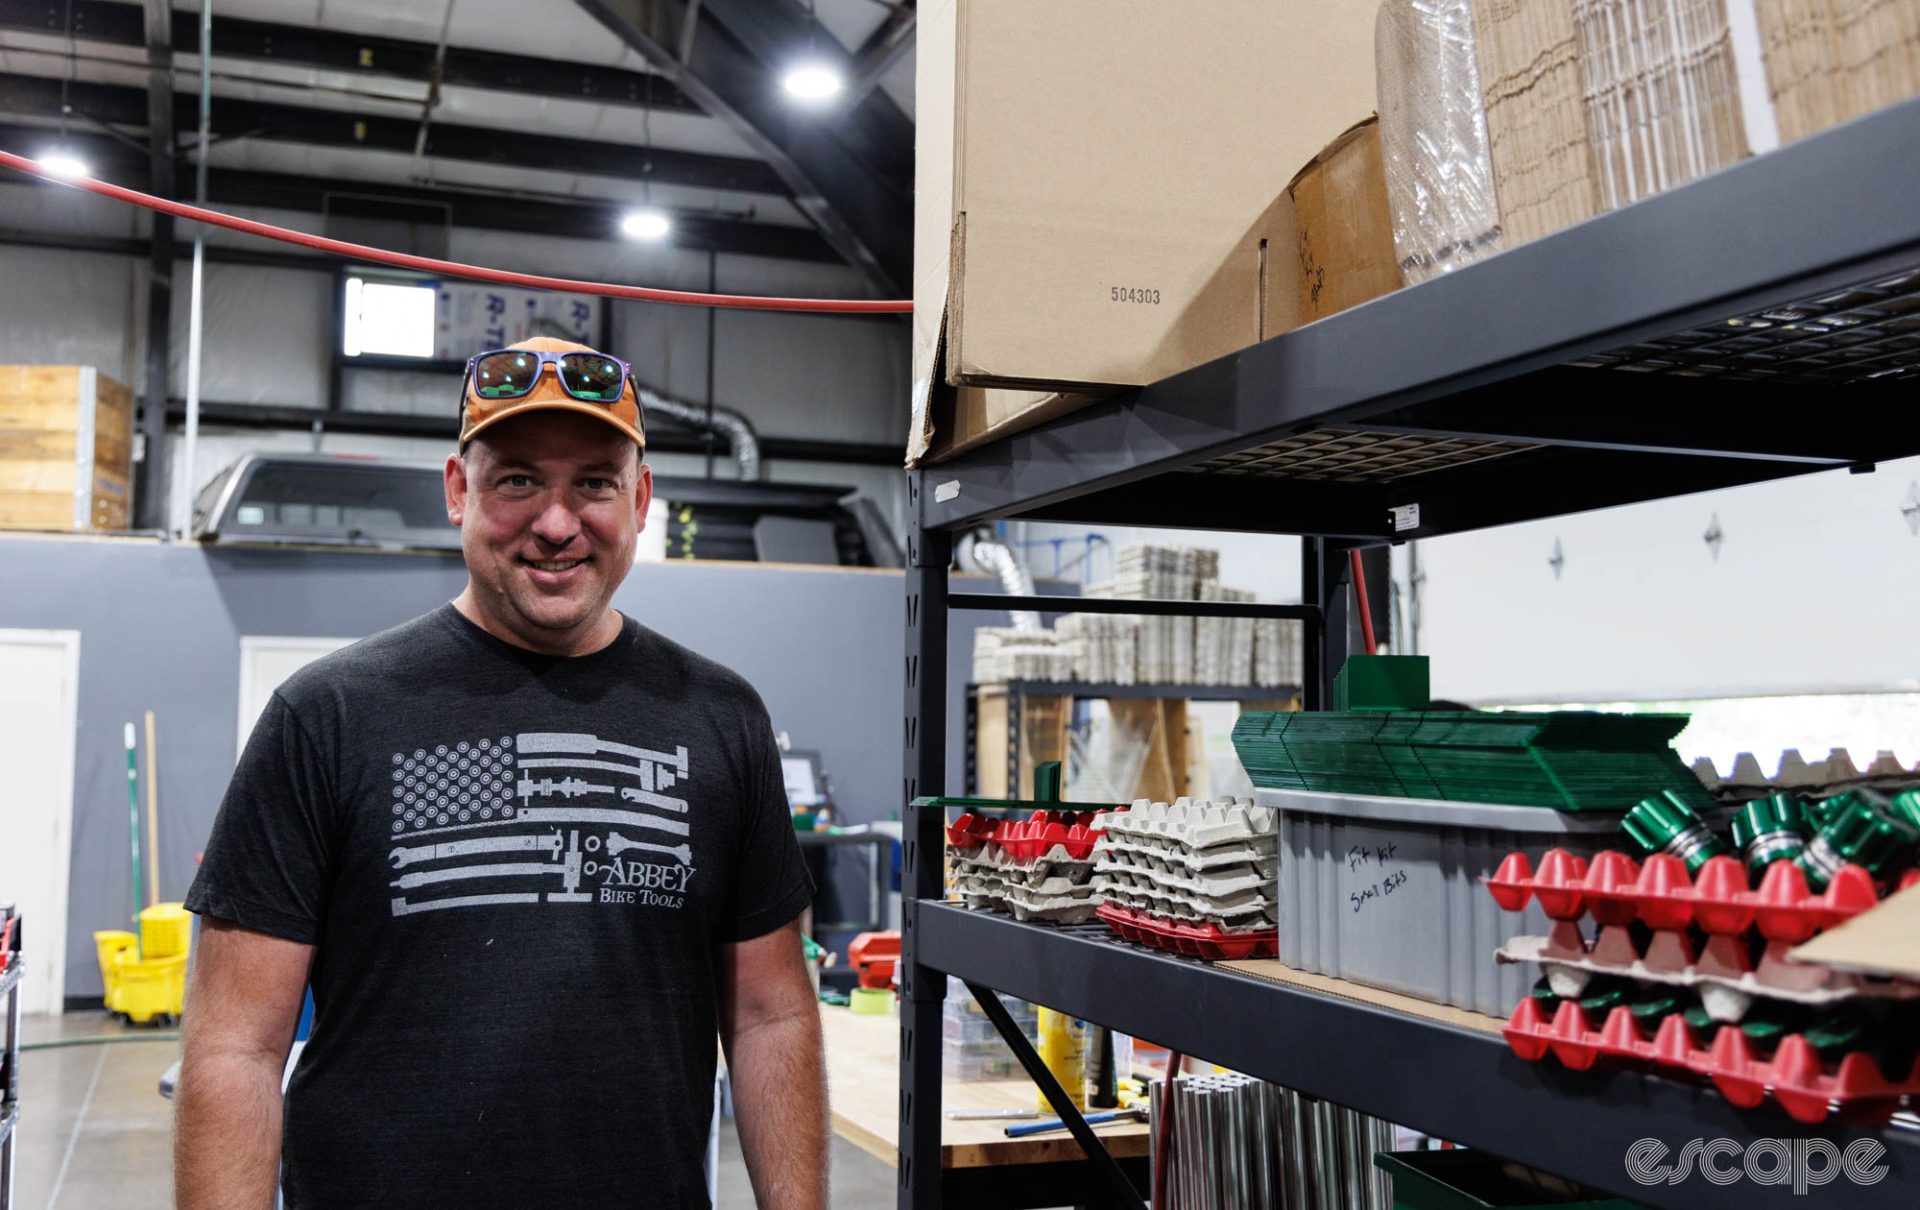 Abbey founder Jason Quade stands near a shelf of tool parts. He's wearing a black t-shirt with an American flag-style design made of Abbey's tools.